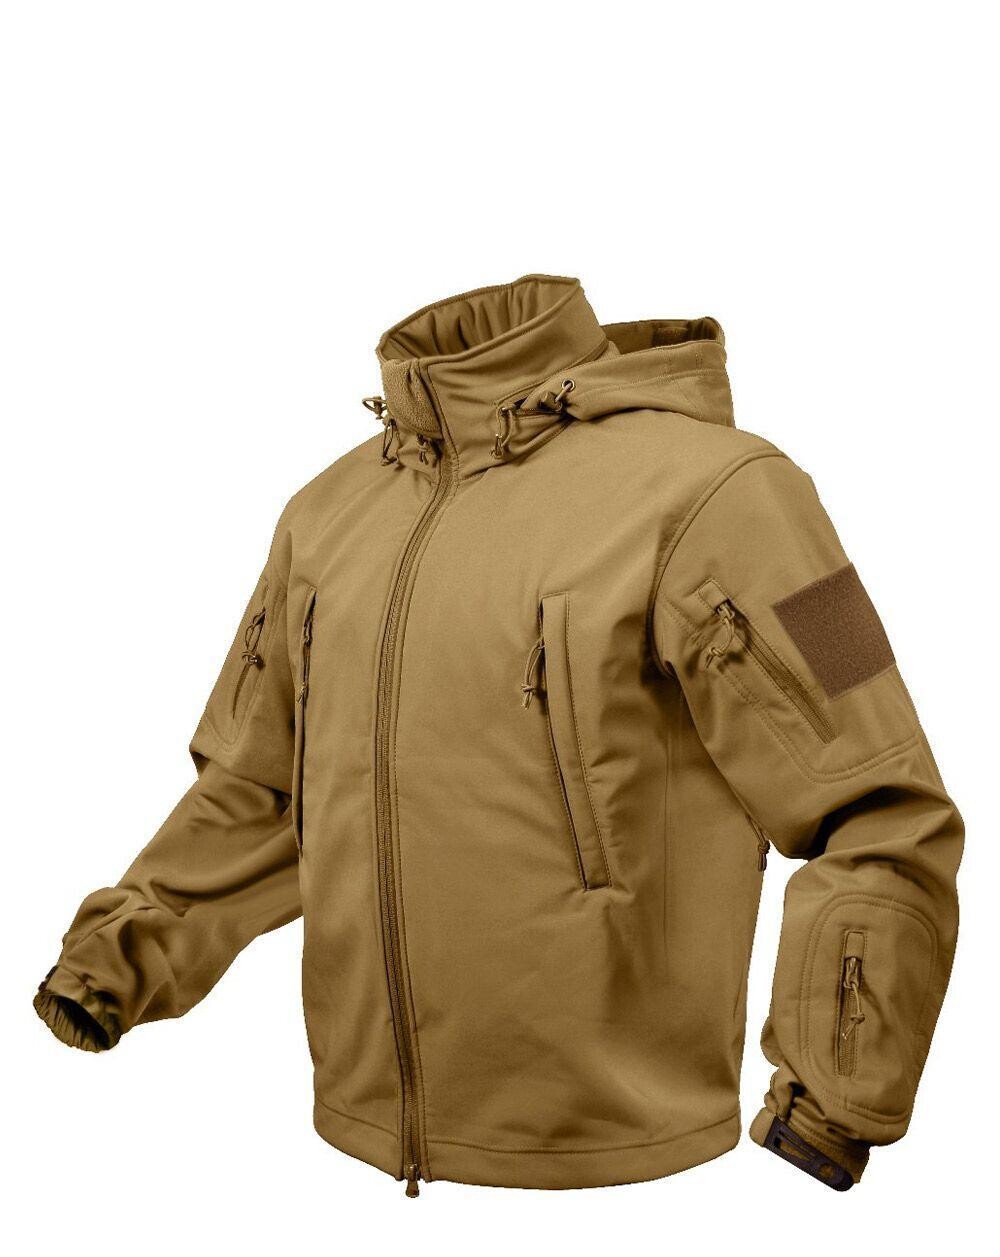 Rothco Special Ops Softshell Jakke (Coyote Brun, M)